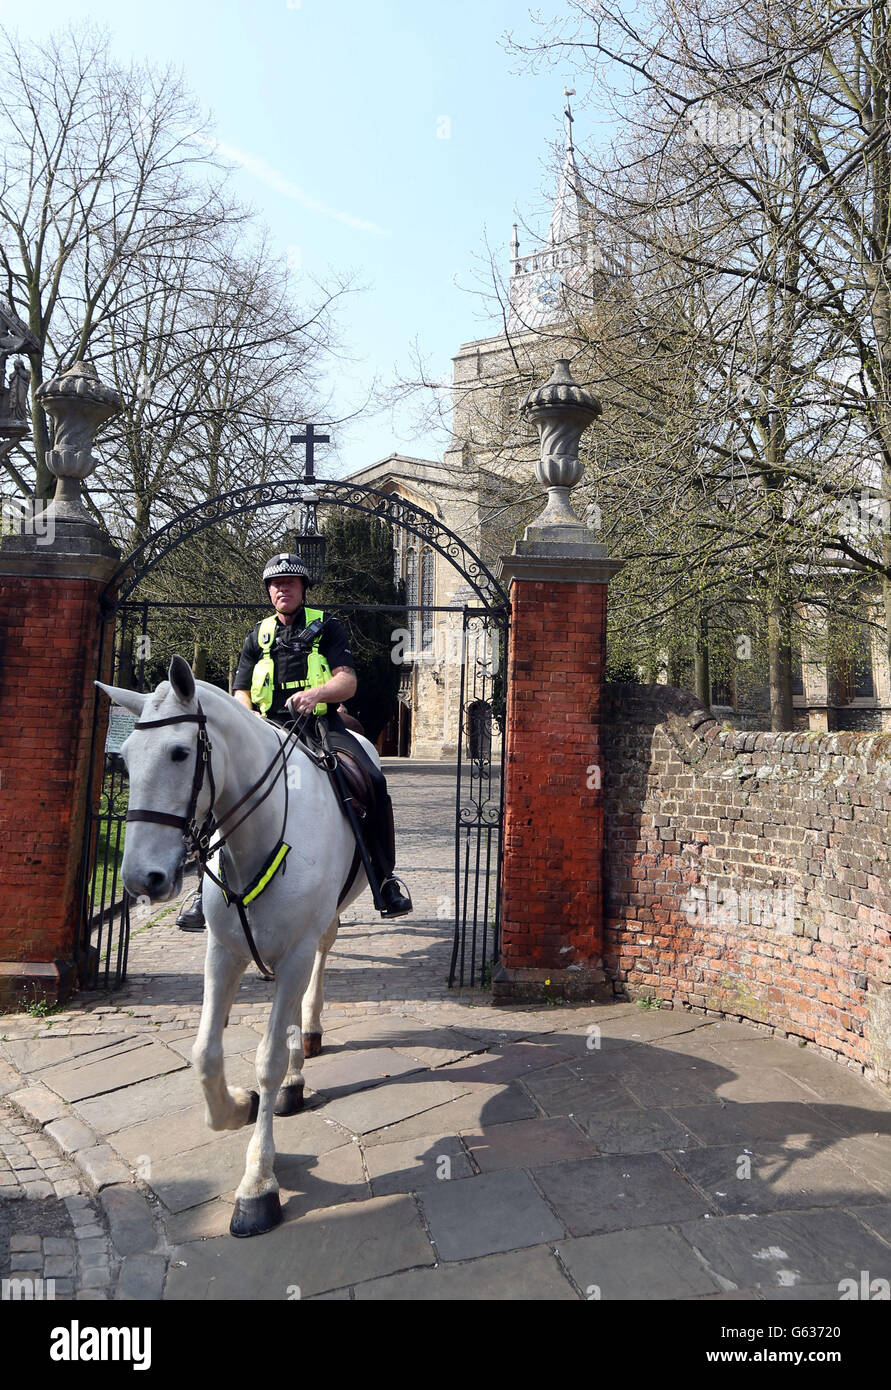 Police horses at St Mary the Virgin church in Aylesbury, Buckinghamshire, where a man found a human ear was found yesterday while walking his dog in the graveyard. Stock Photo